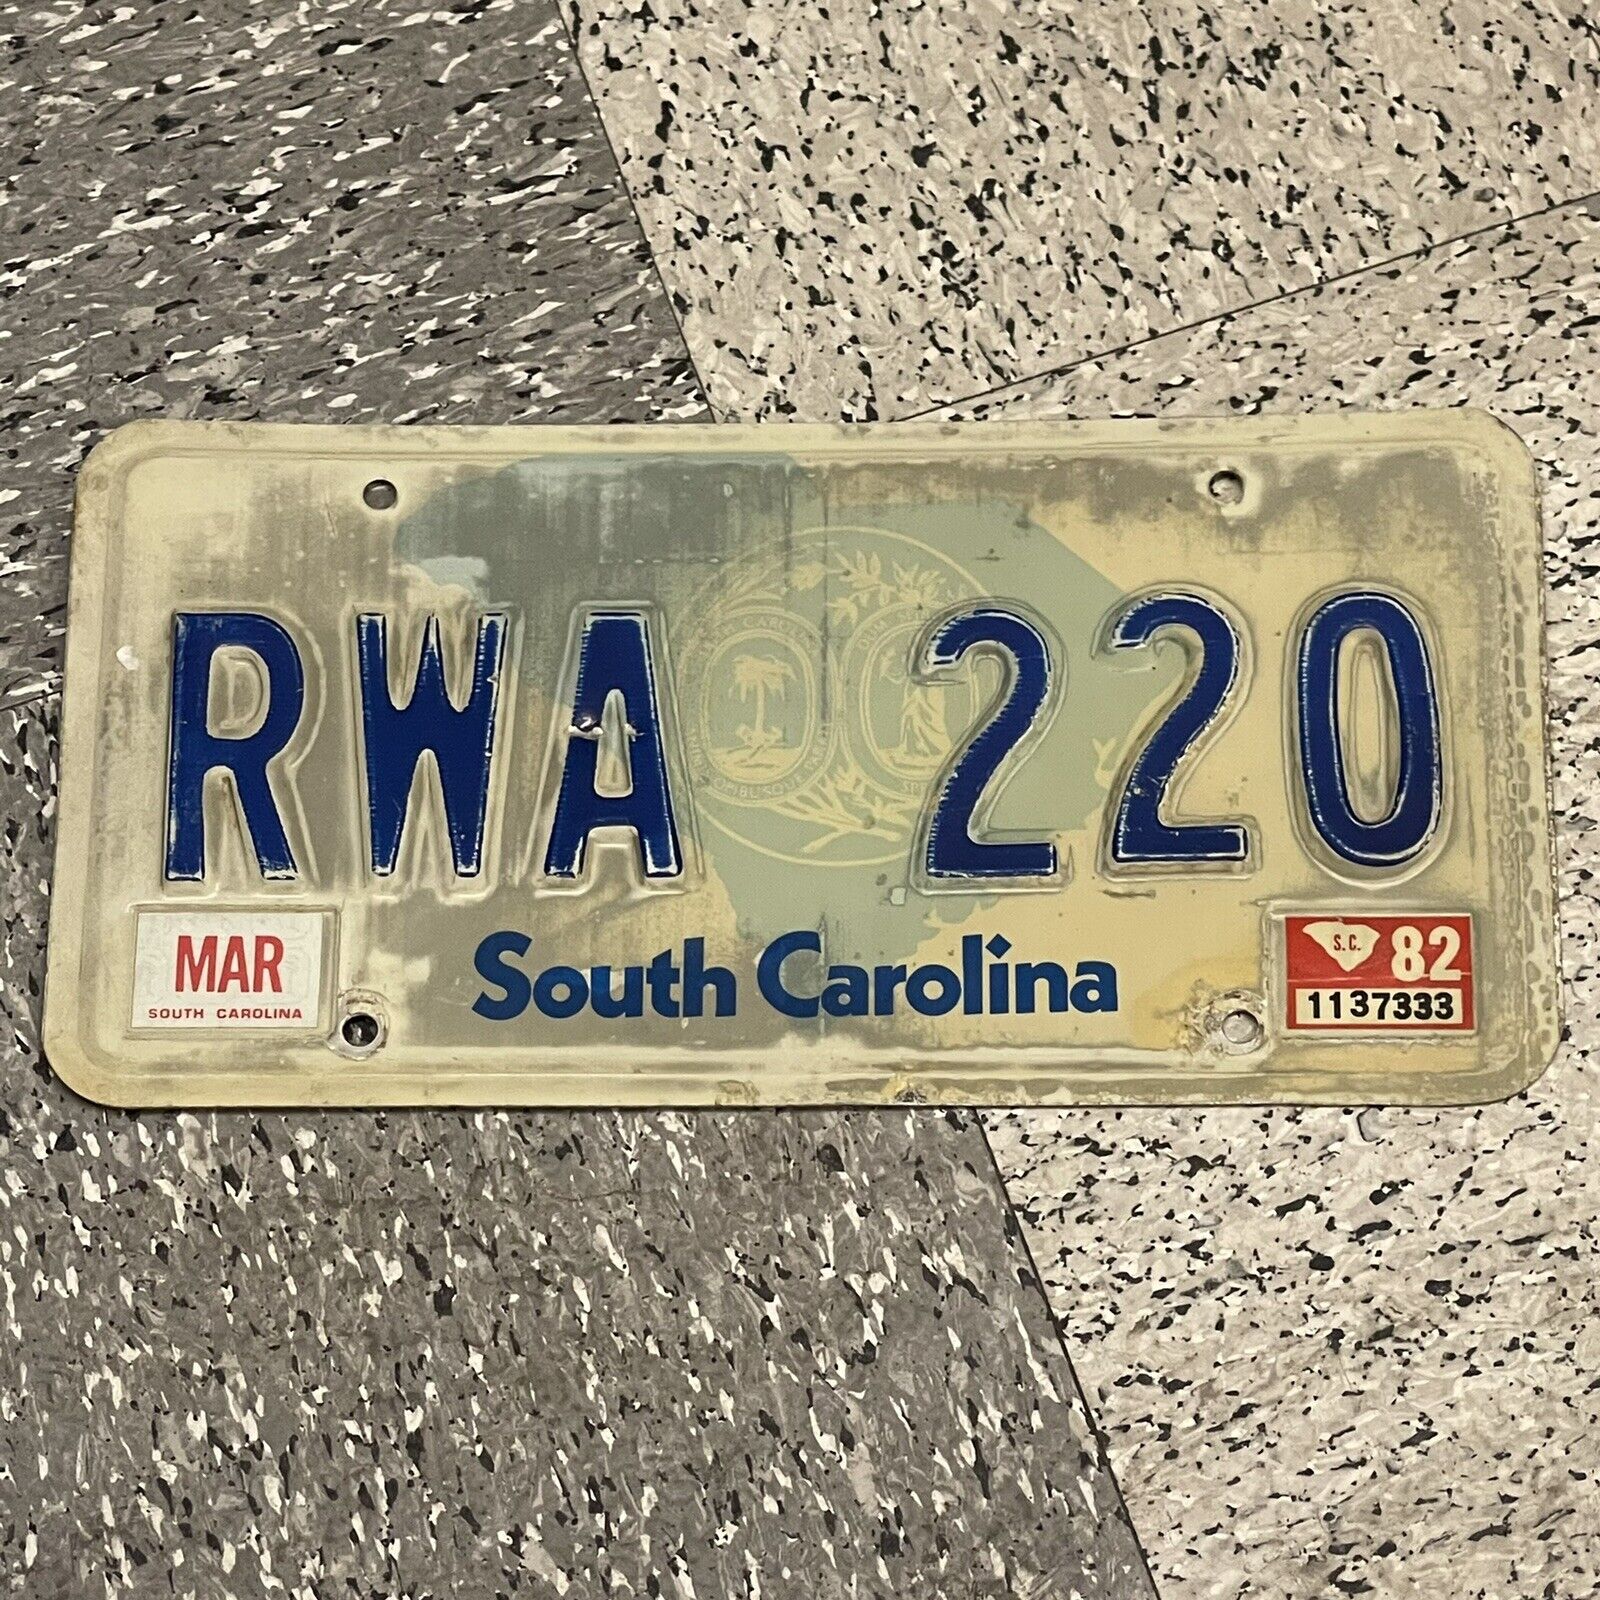 South Carolina License Plate Tag State Emblem RWA 220 March 1982 Vintage Expired